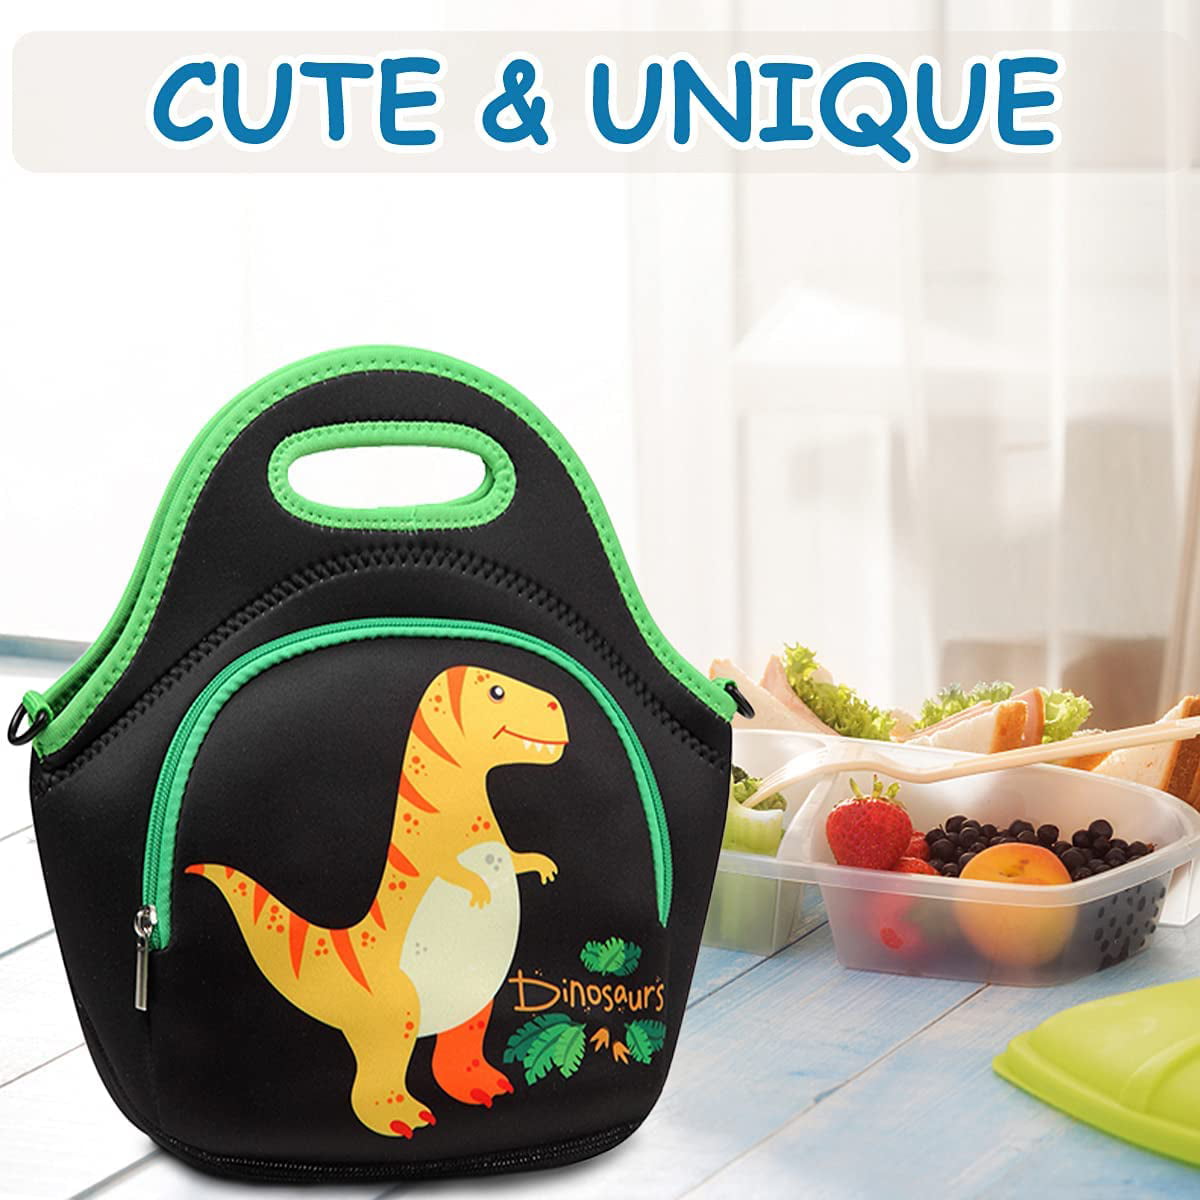 Lunch Bag for Boys Chasechic Cute Lightweight Neoprene Insulated Lunch Boxes Tote with Detachable Adjustable Shoulder Strap 3-18Years Black Dinosaur 